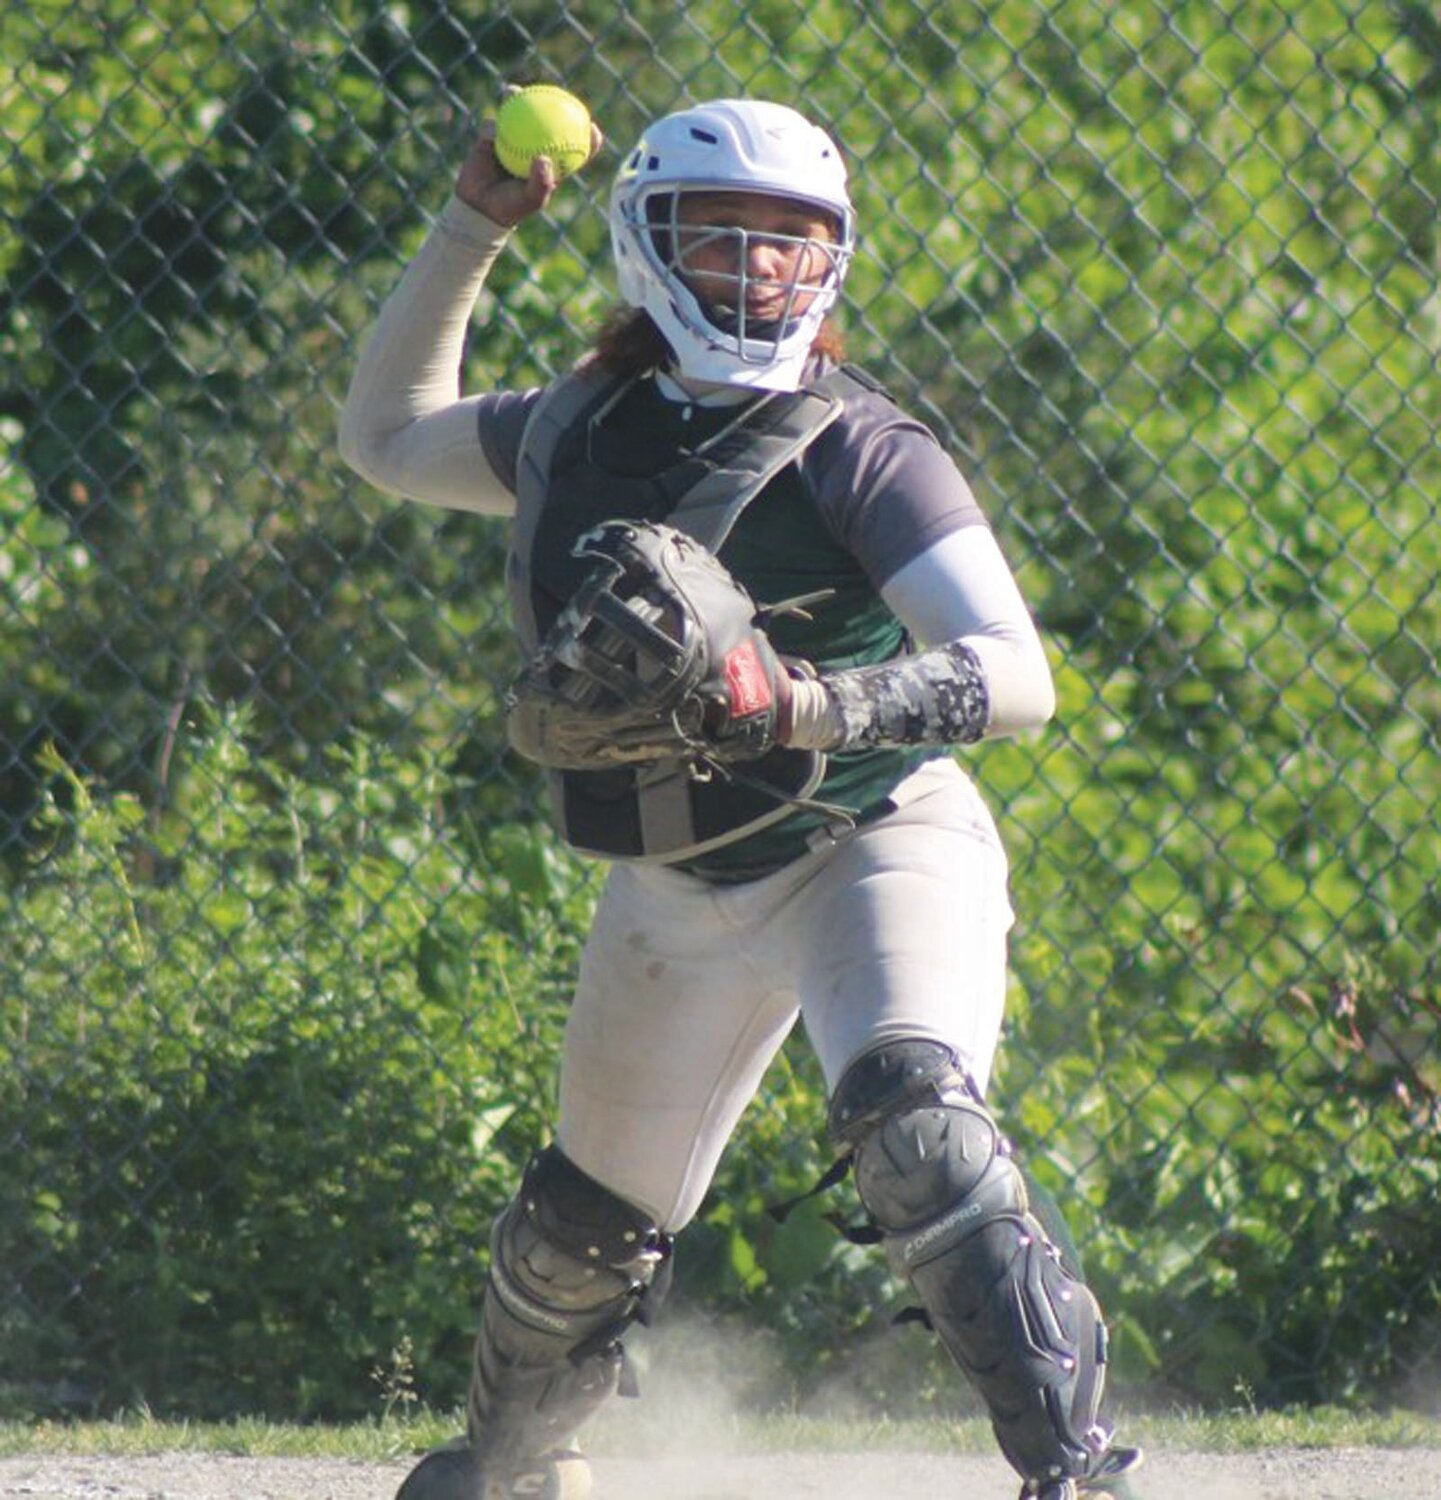 BEHIND THE PLATE: East catcher Jaylanie Rosado makes a play.